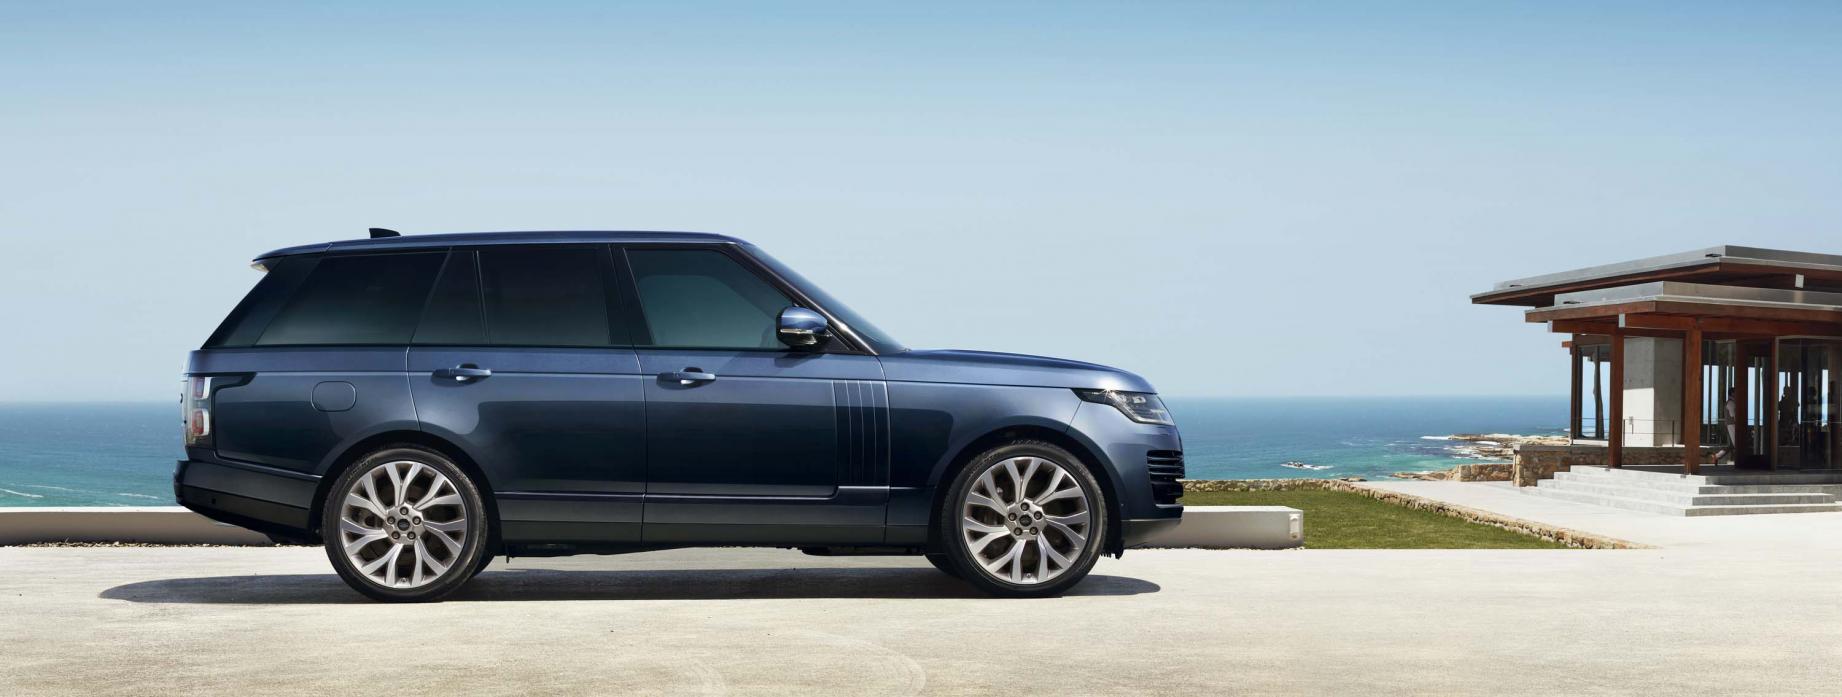 On the road: The new Range Rover D300 Westminster